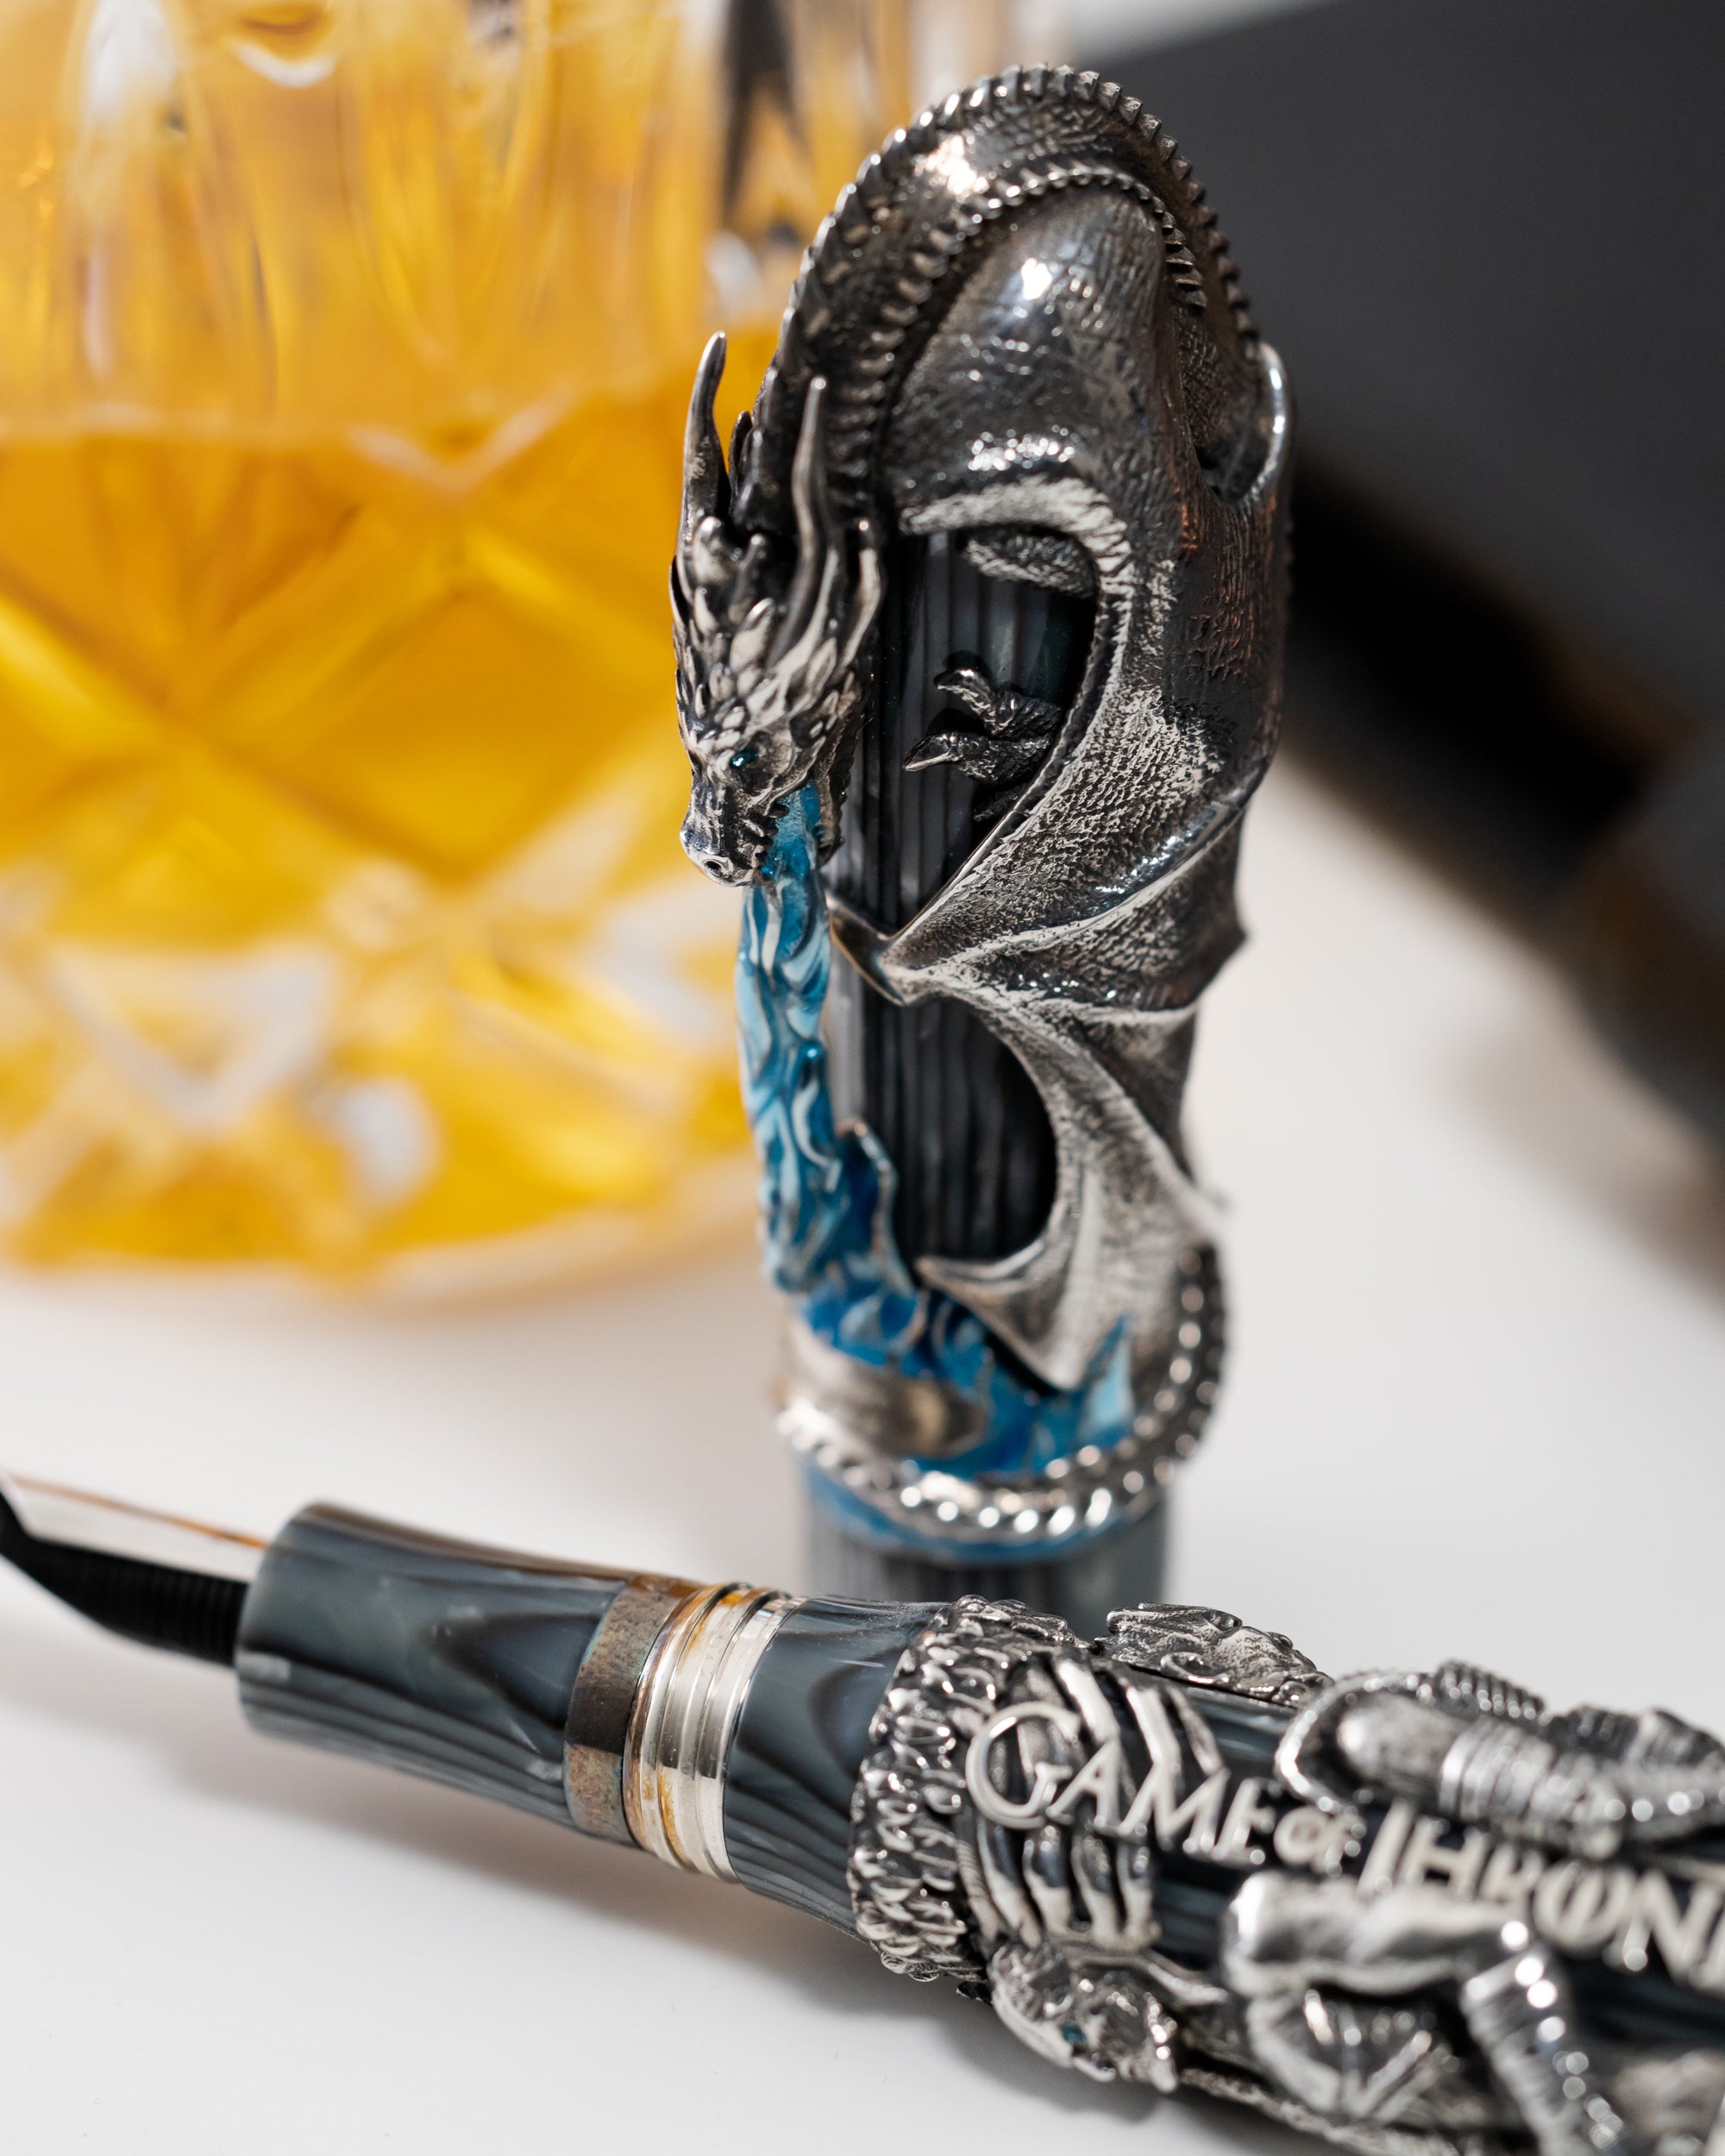 Montegrappa Game of Thrones "Winter is Here" Limited Edition